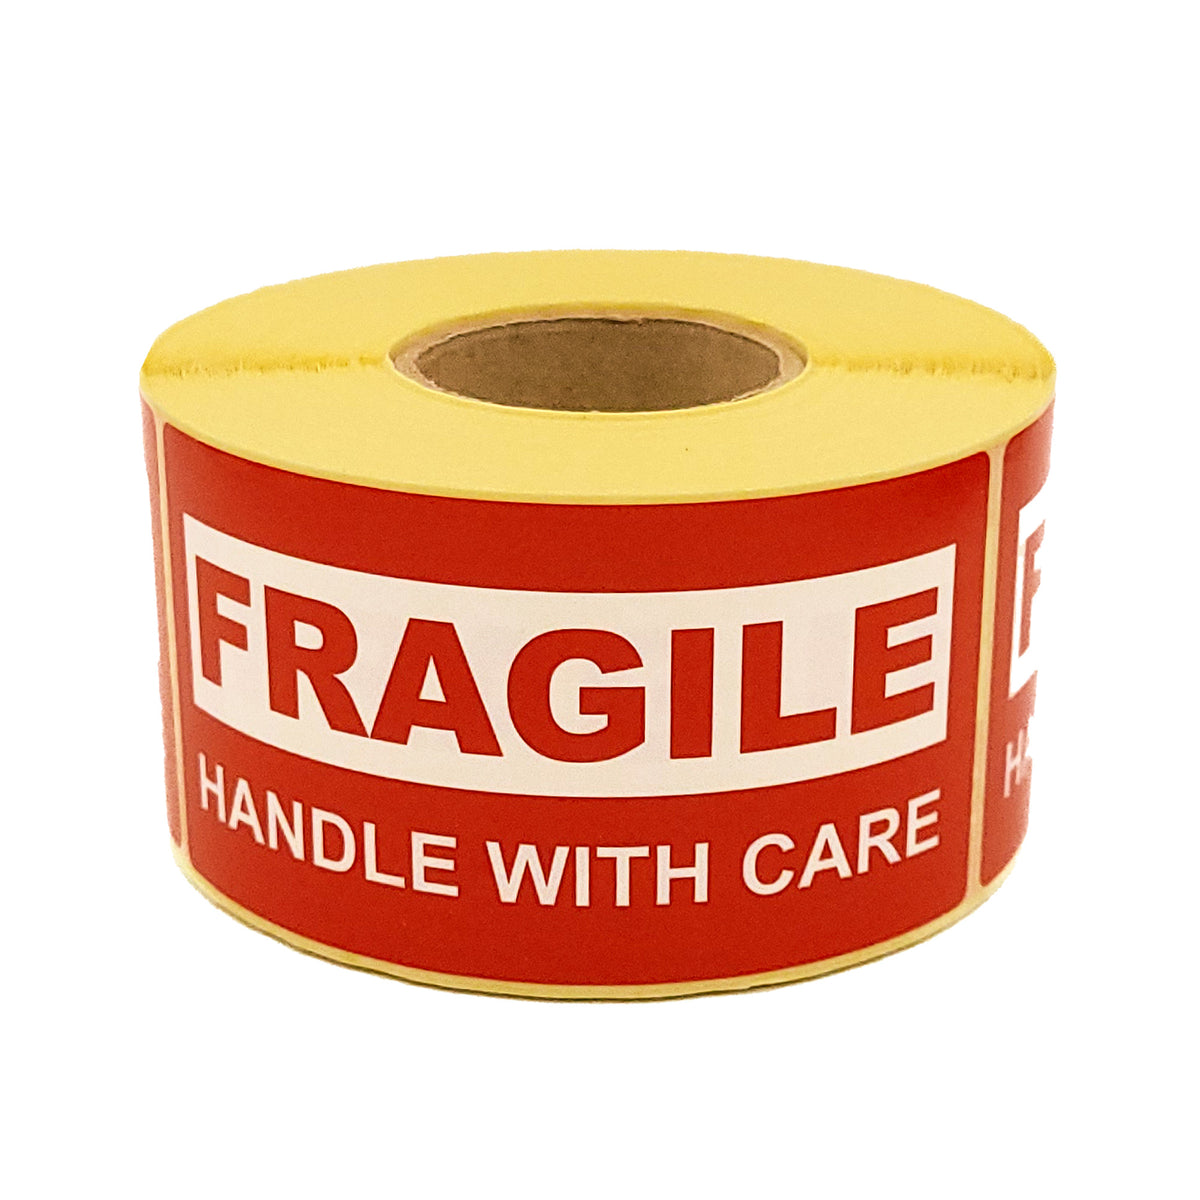 Warning Labels on Roll 100 x 50 mm- Fragile Handle with Care 500 pcs